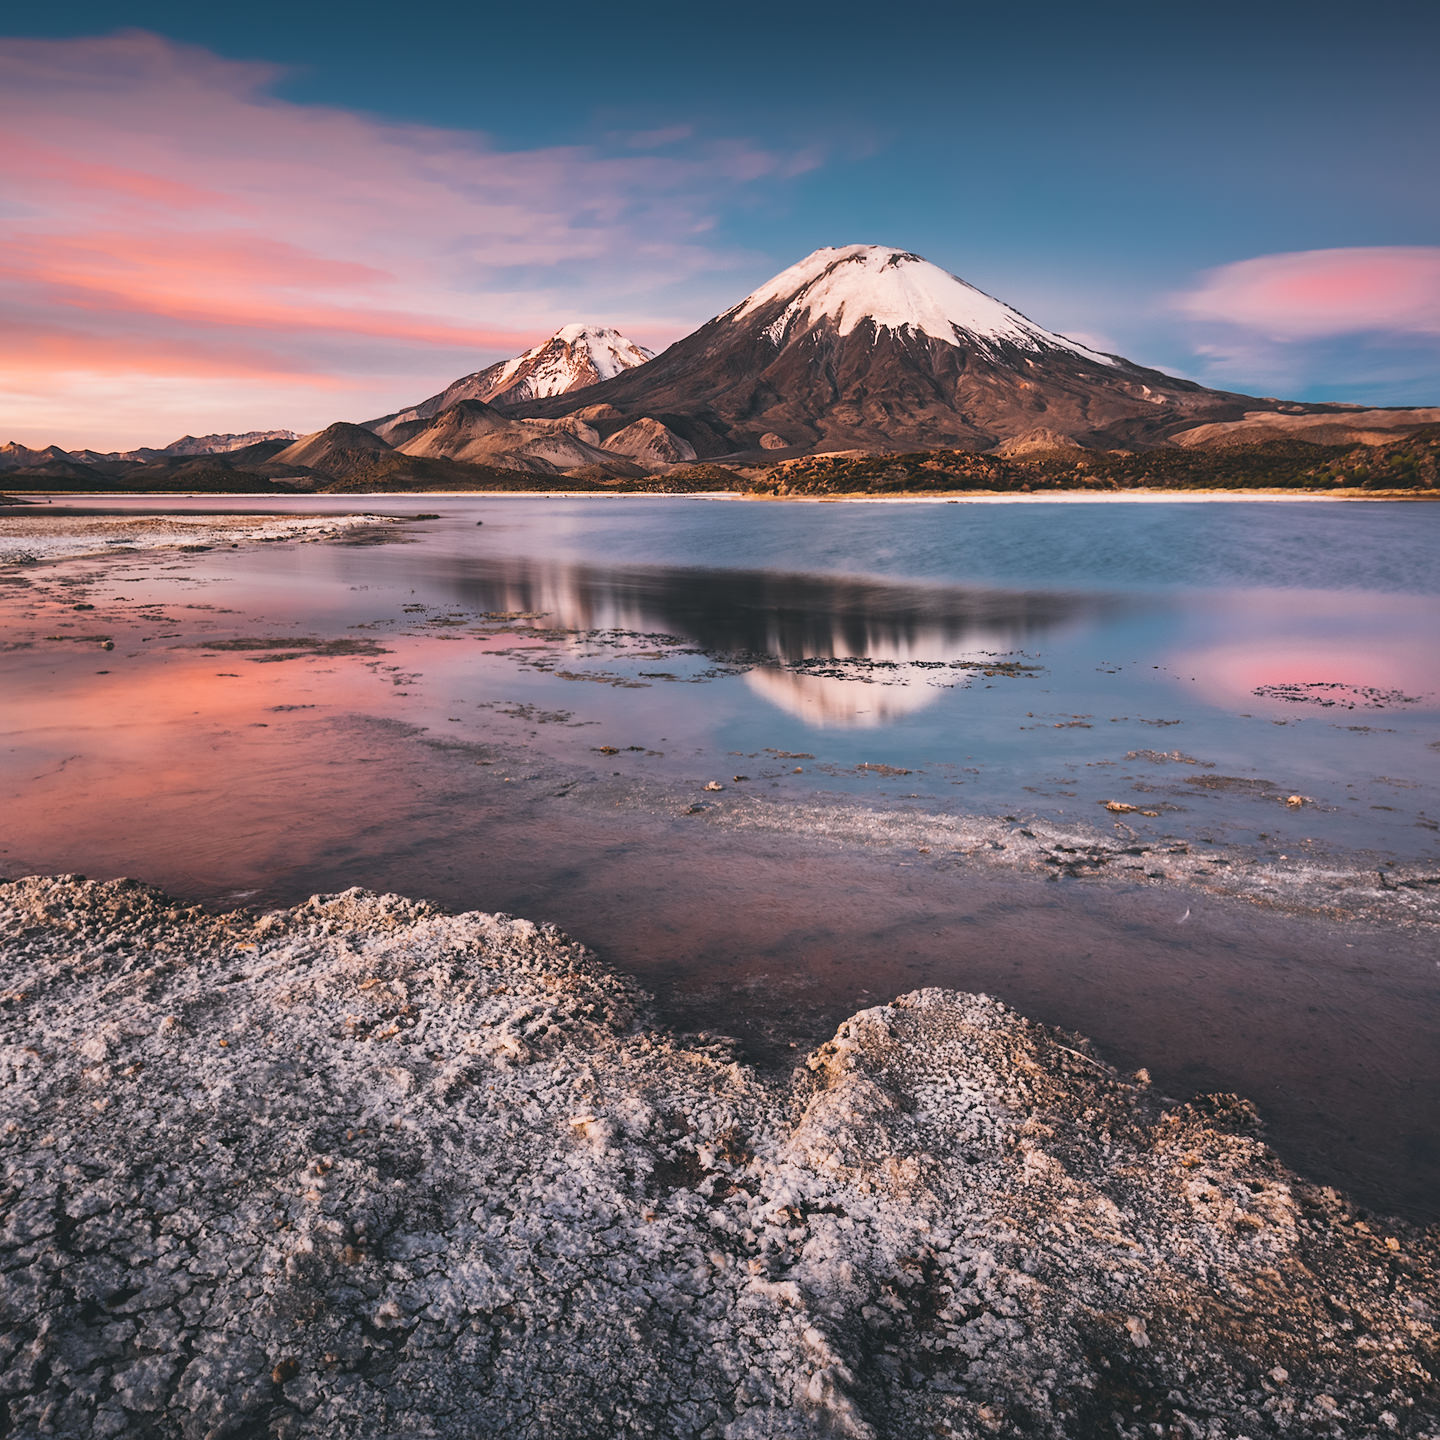 Volcanoes reflected in a lake at sunset.